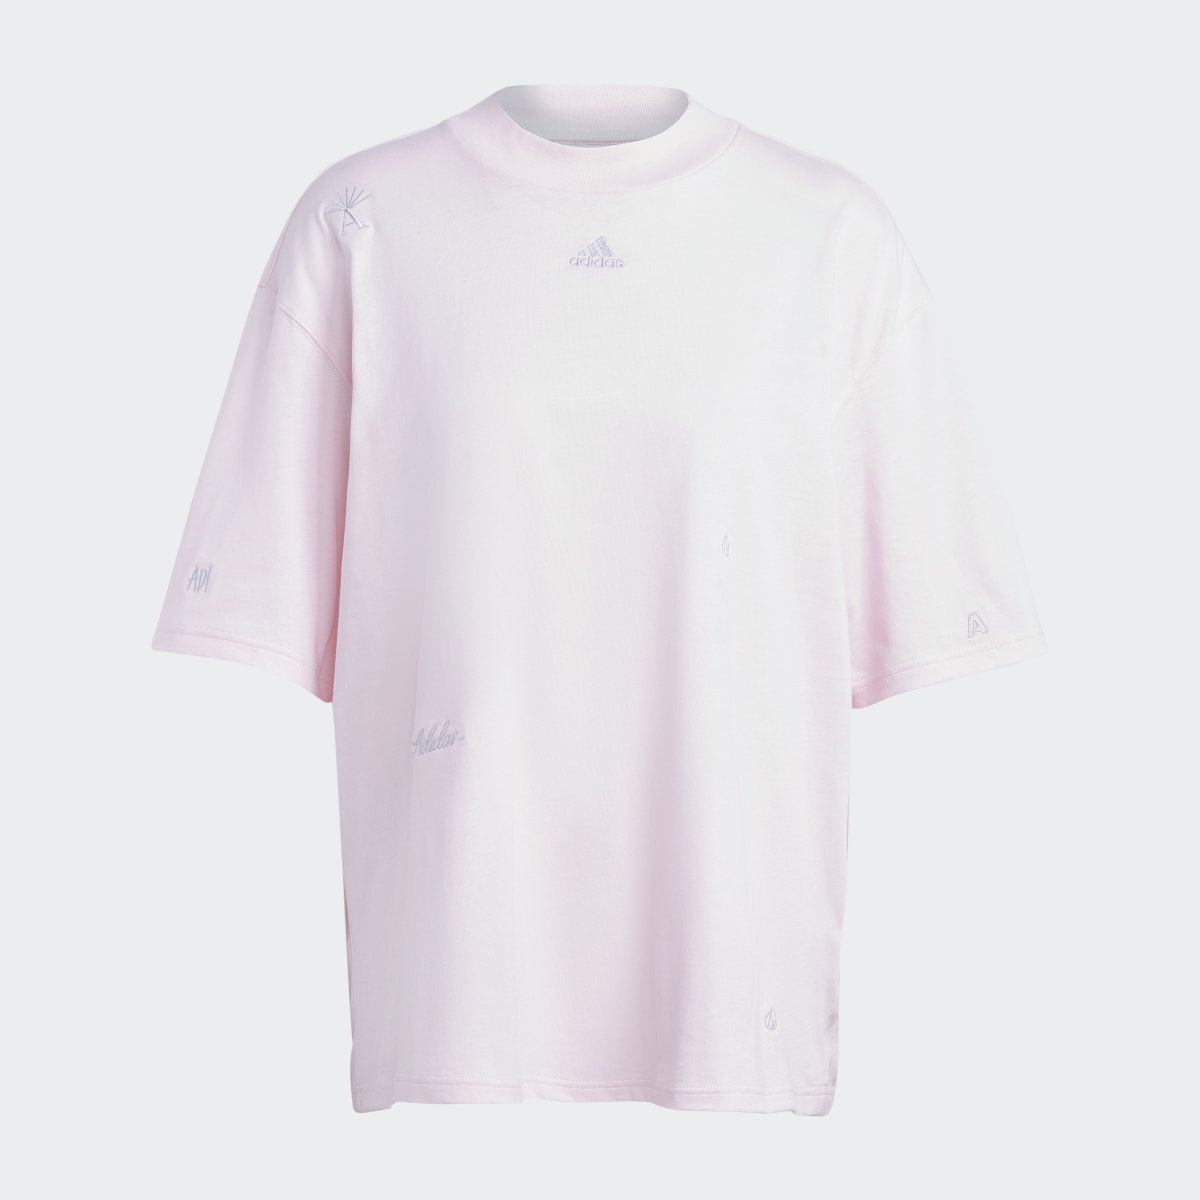 Adidas Boyfriend Tee with Healing Crystals Inspired Graphics. 5